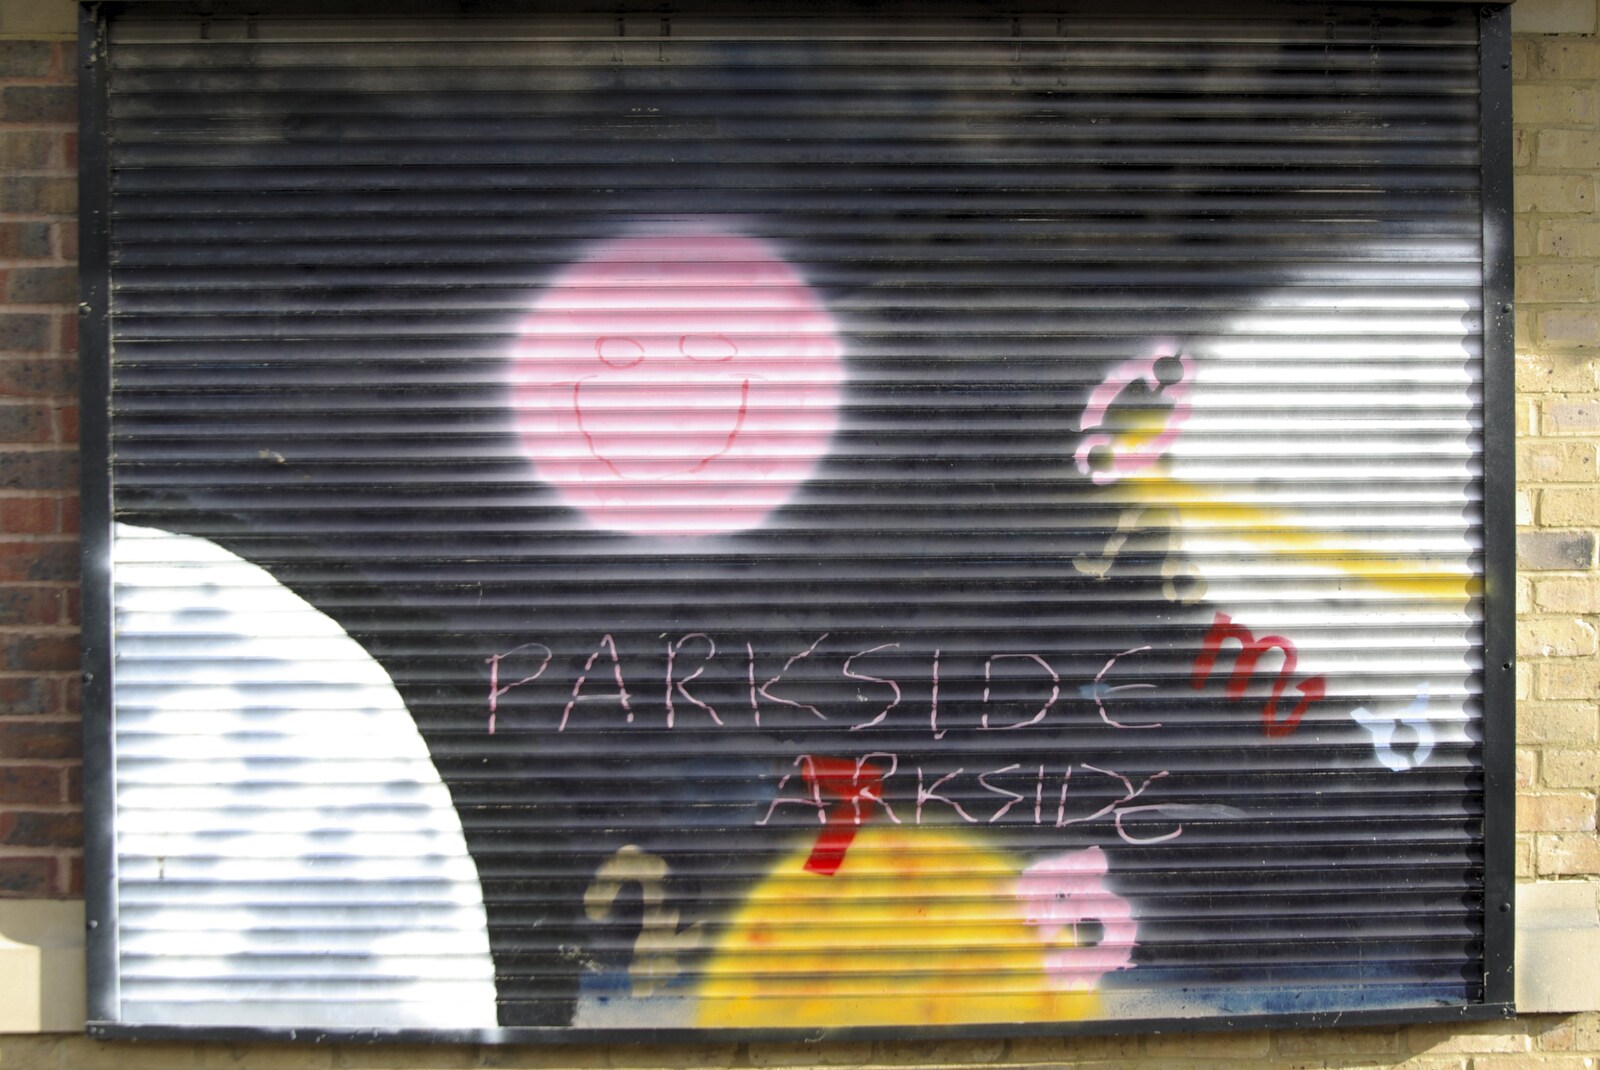 Graffiti on Parkside, near Parker's Piece from The Derelict Salam Newsagents, Perne Road, Cambridge - 18th March 2007